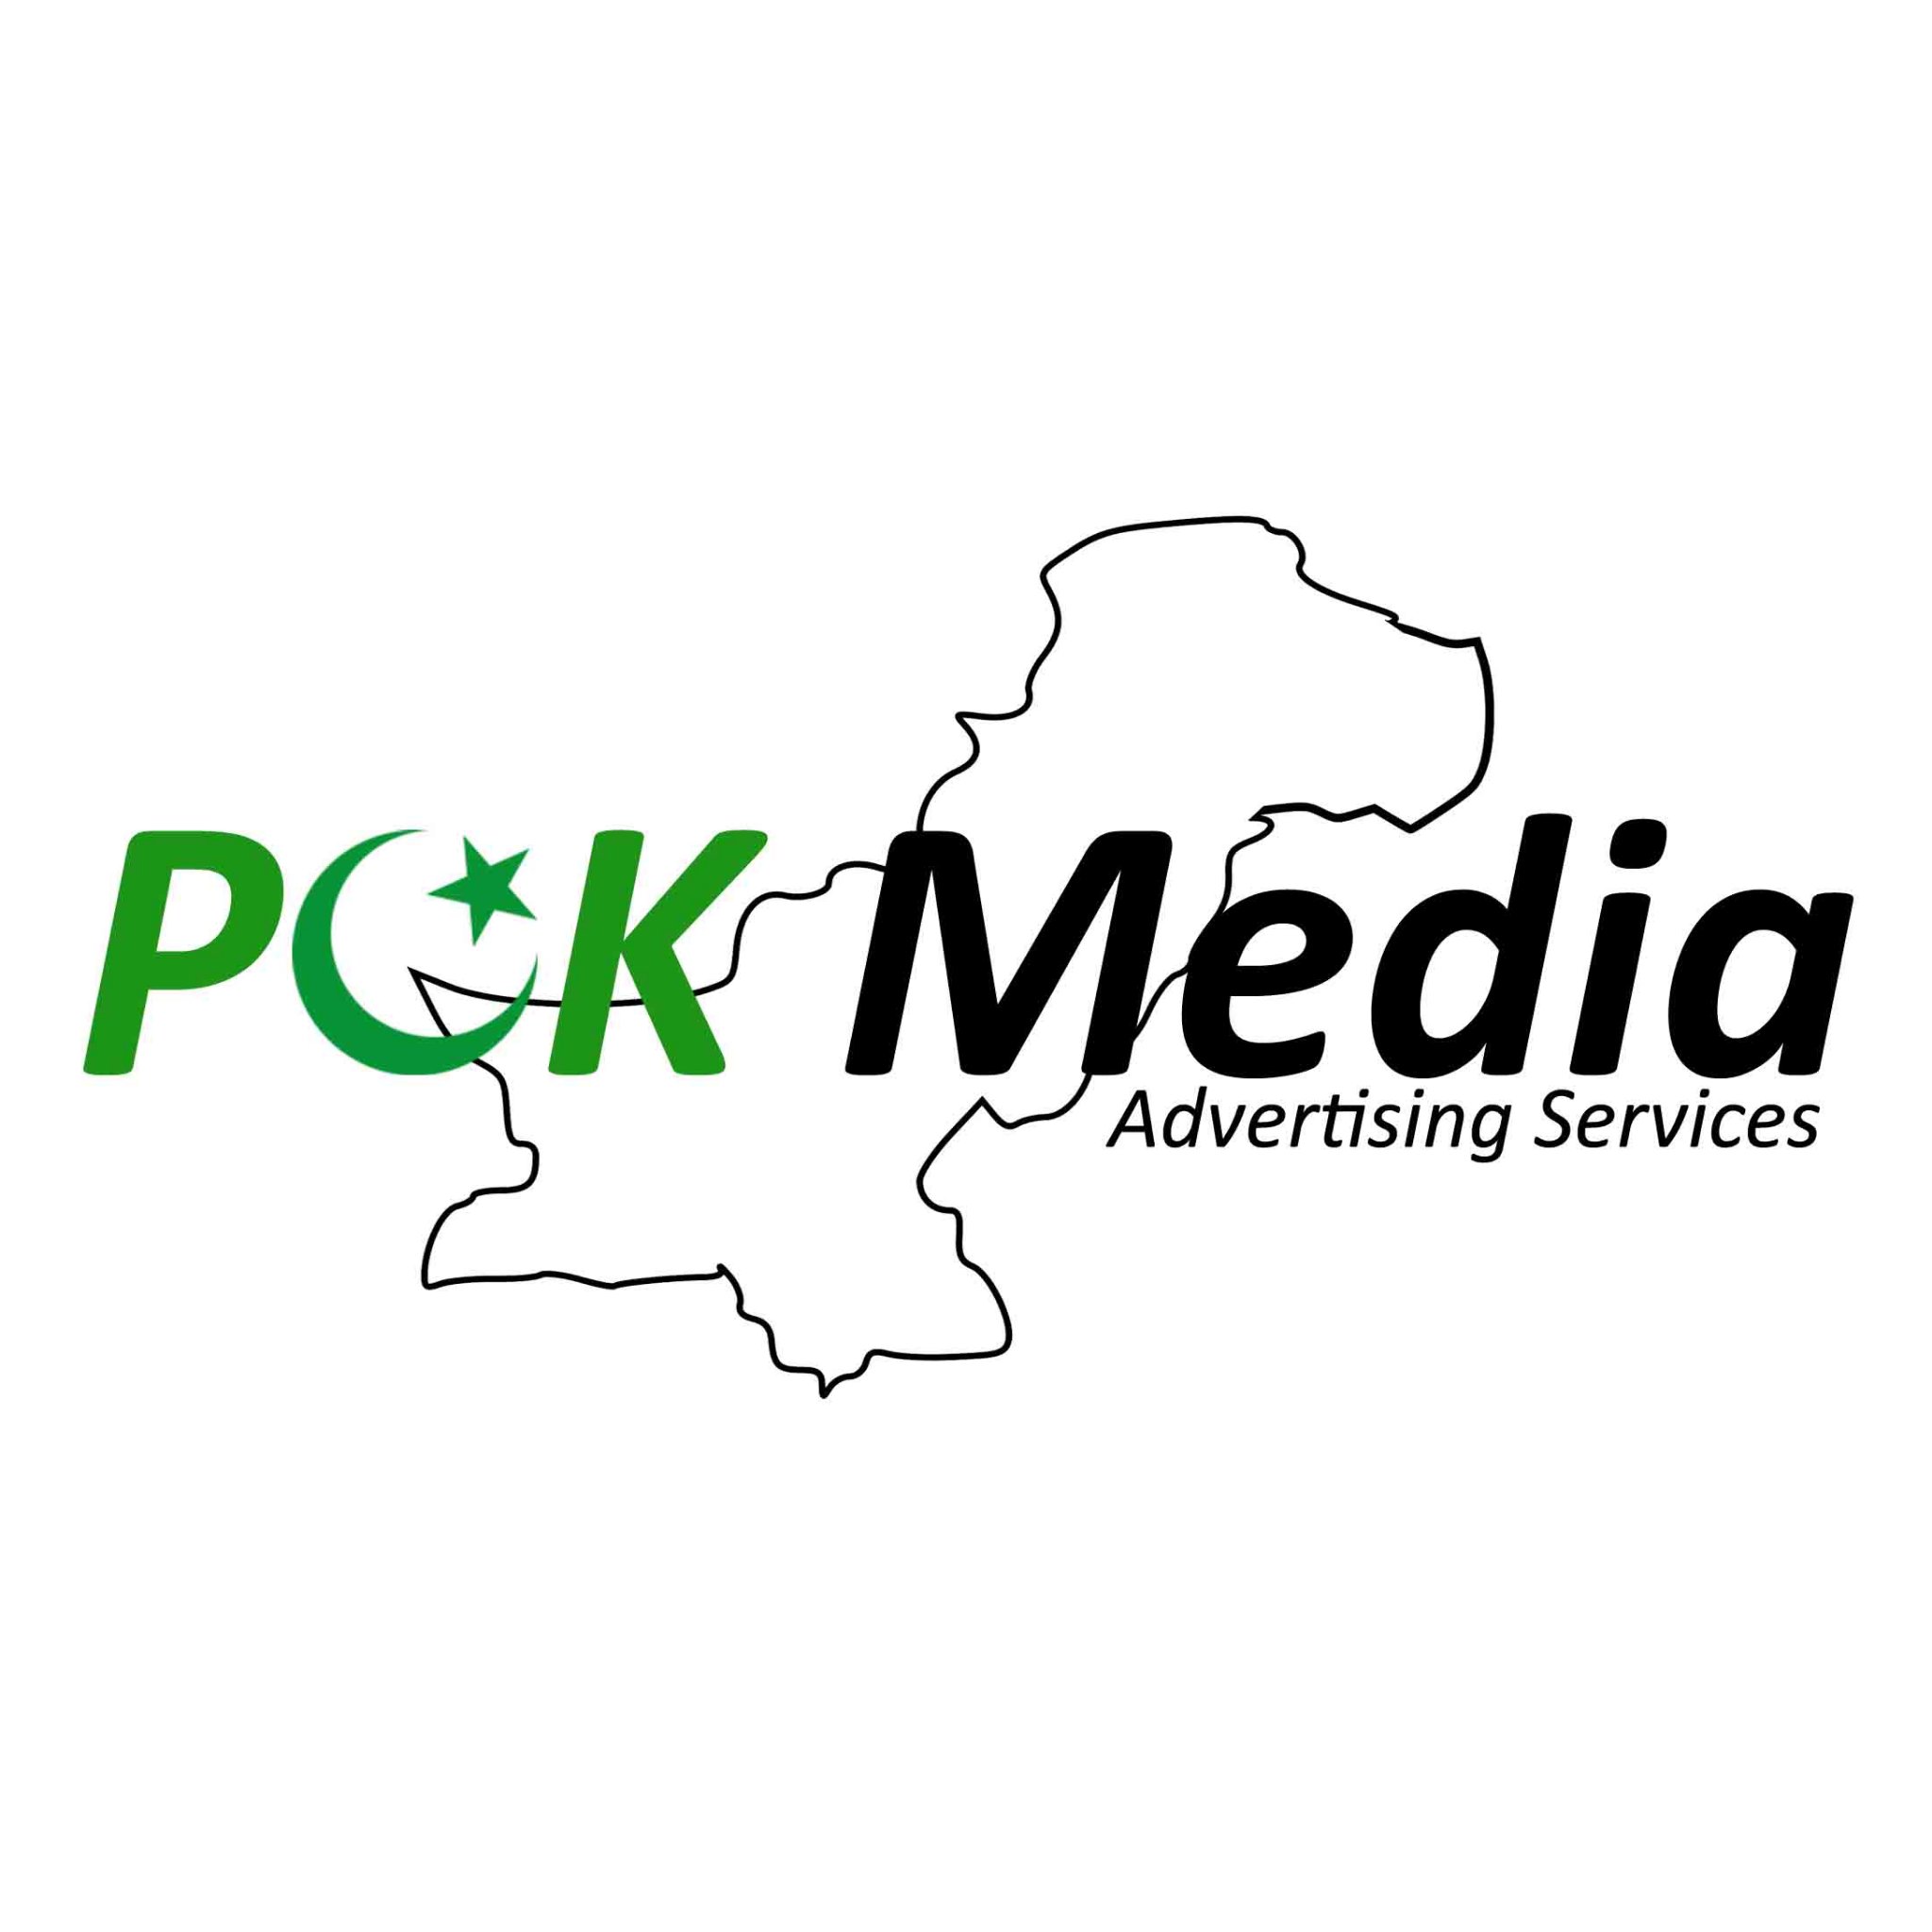 Outdoor Advertising Services....
Providing Outdoor Media Round the Pakistan....
Love to work....🙂